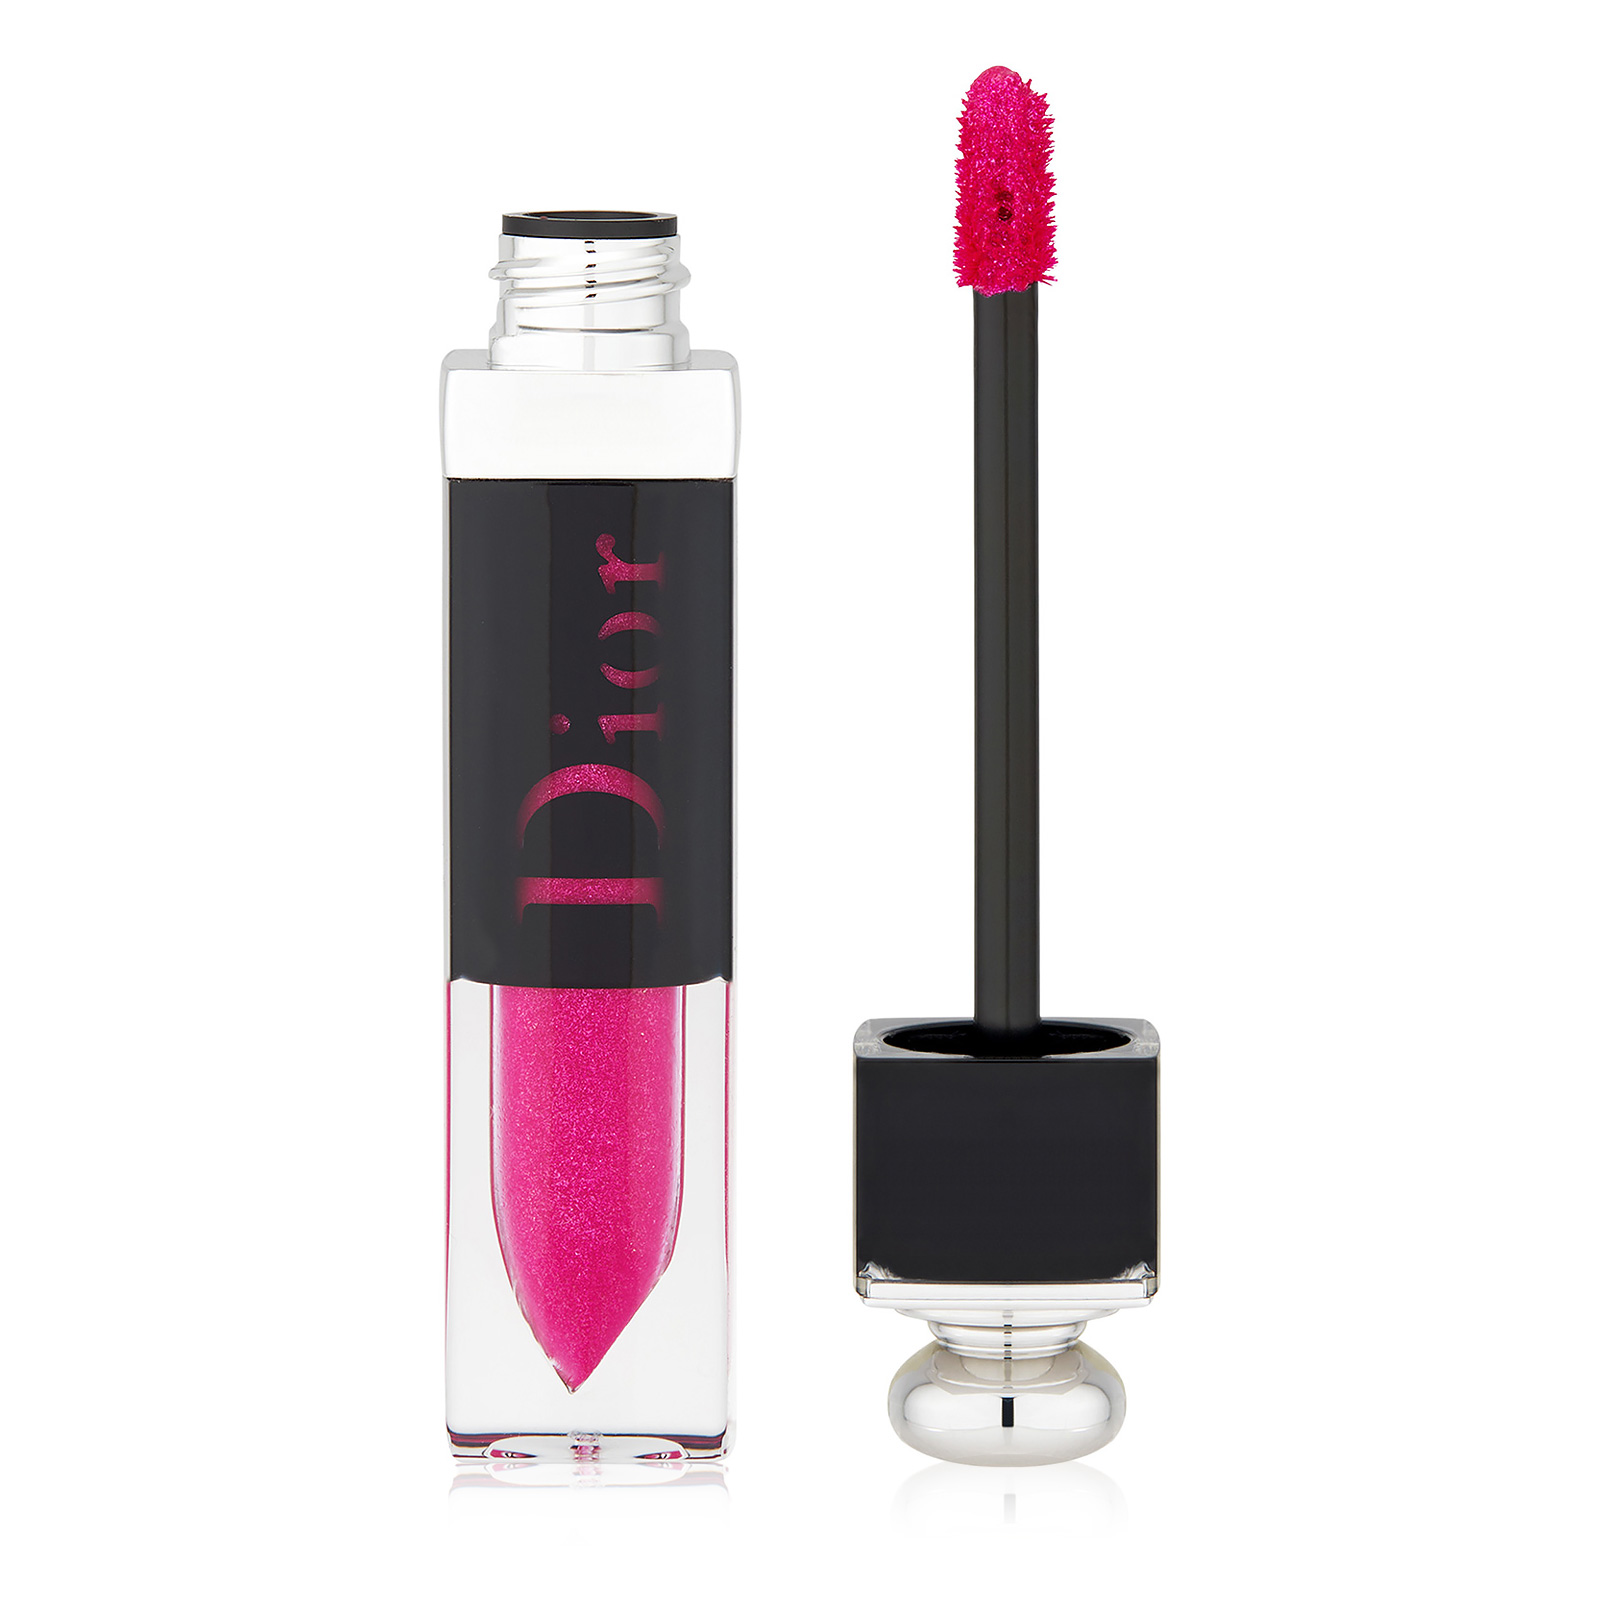 Dior Addict Lacquer Plump Plumping Lacquered Lip Ink Long-Wear Colour